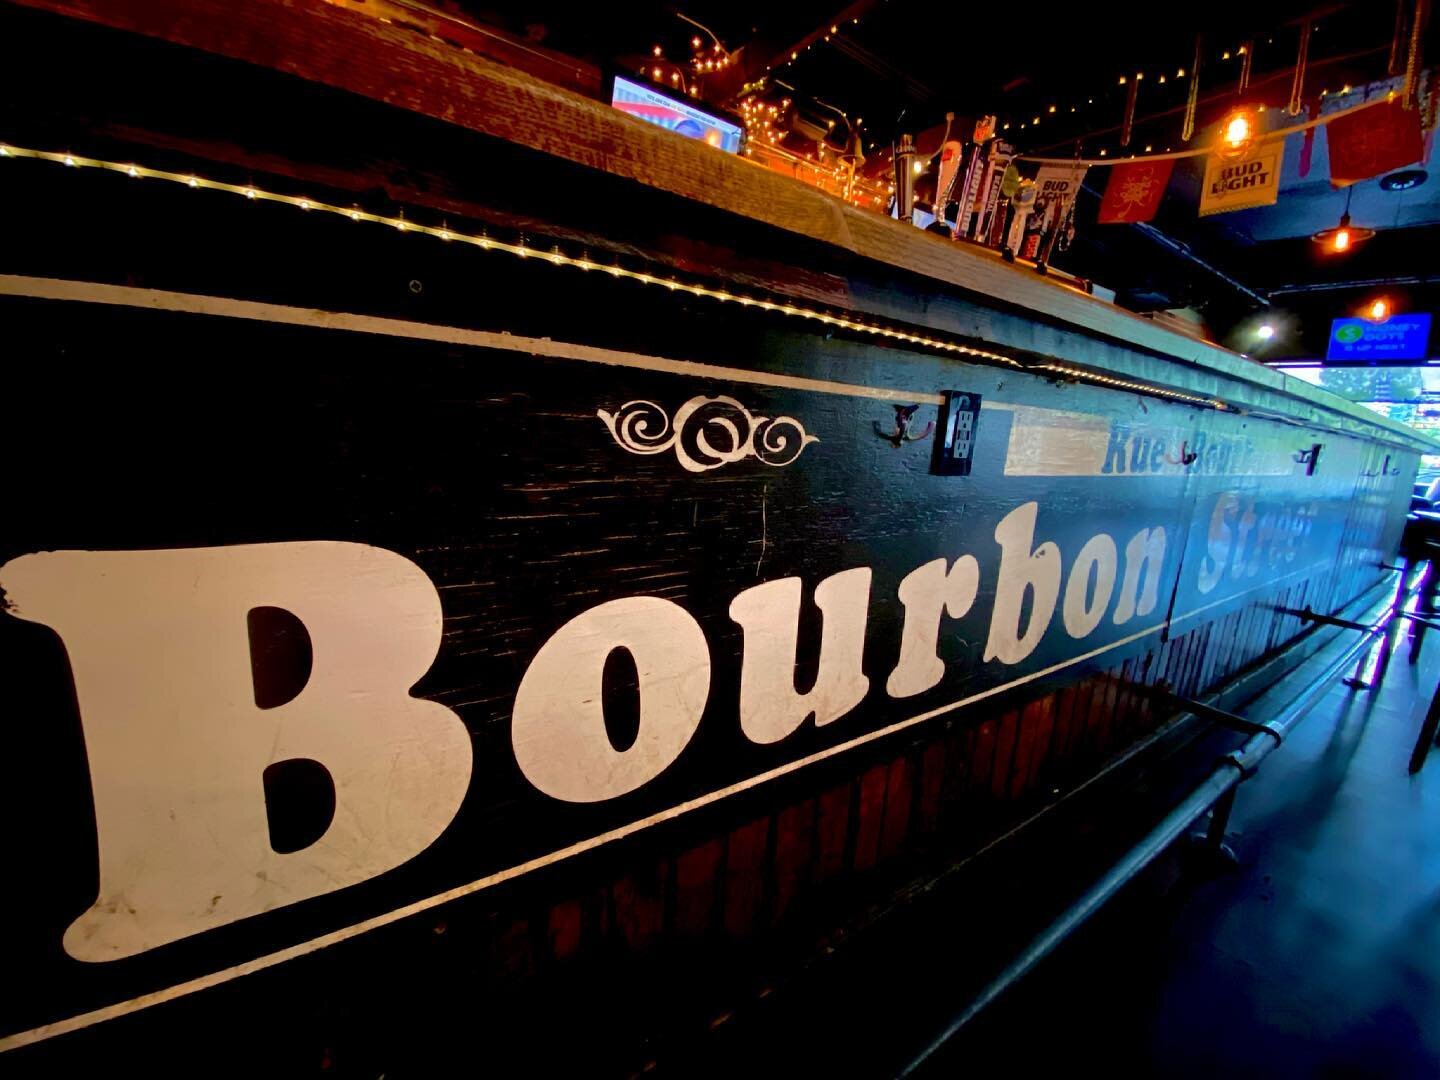 Today is national bourbon day! Come down to bourbon street and enjoy some great food and drinks 🥃